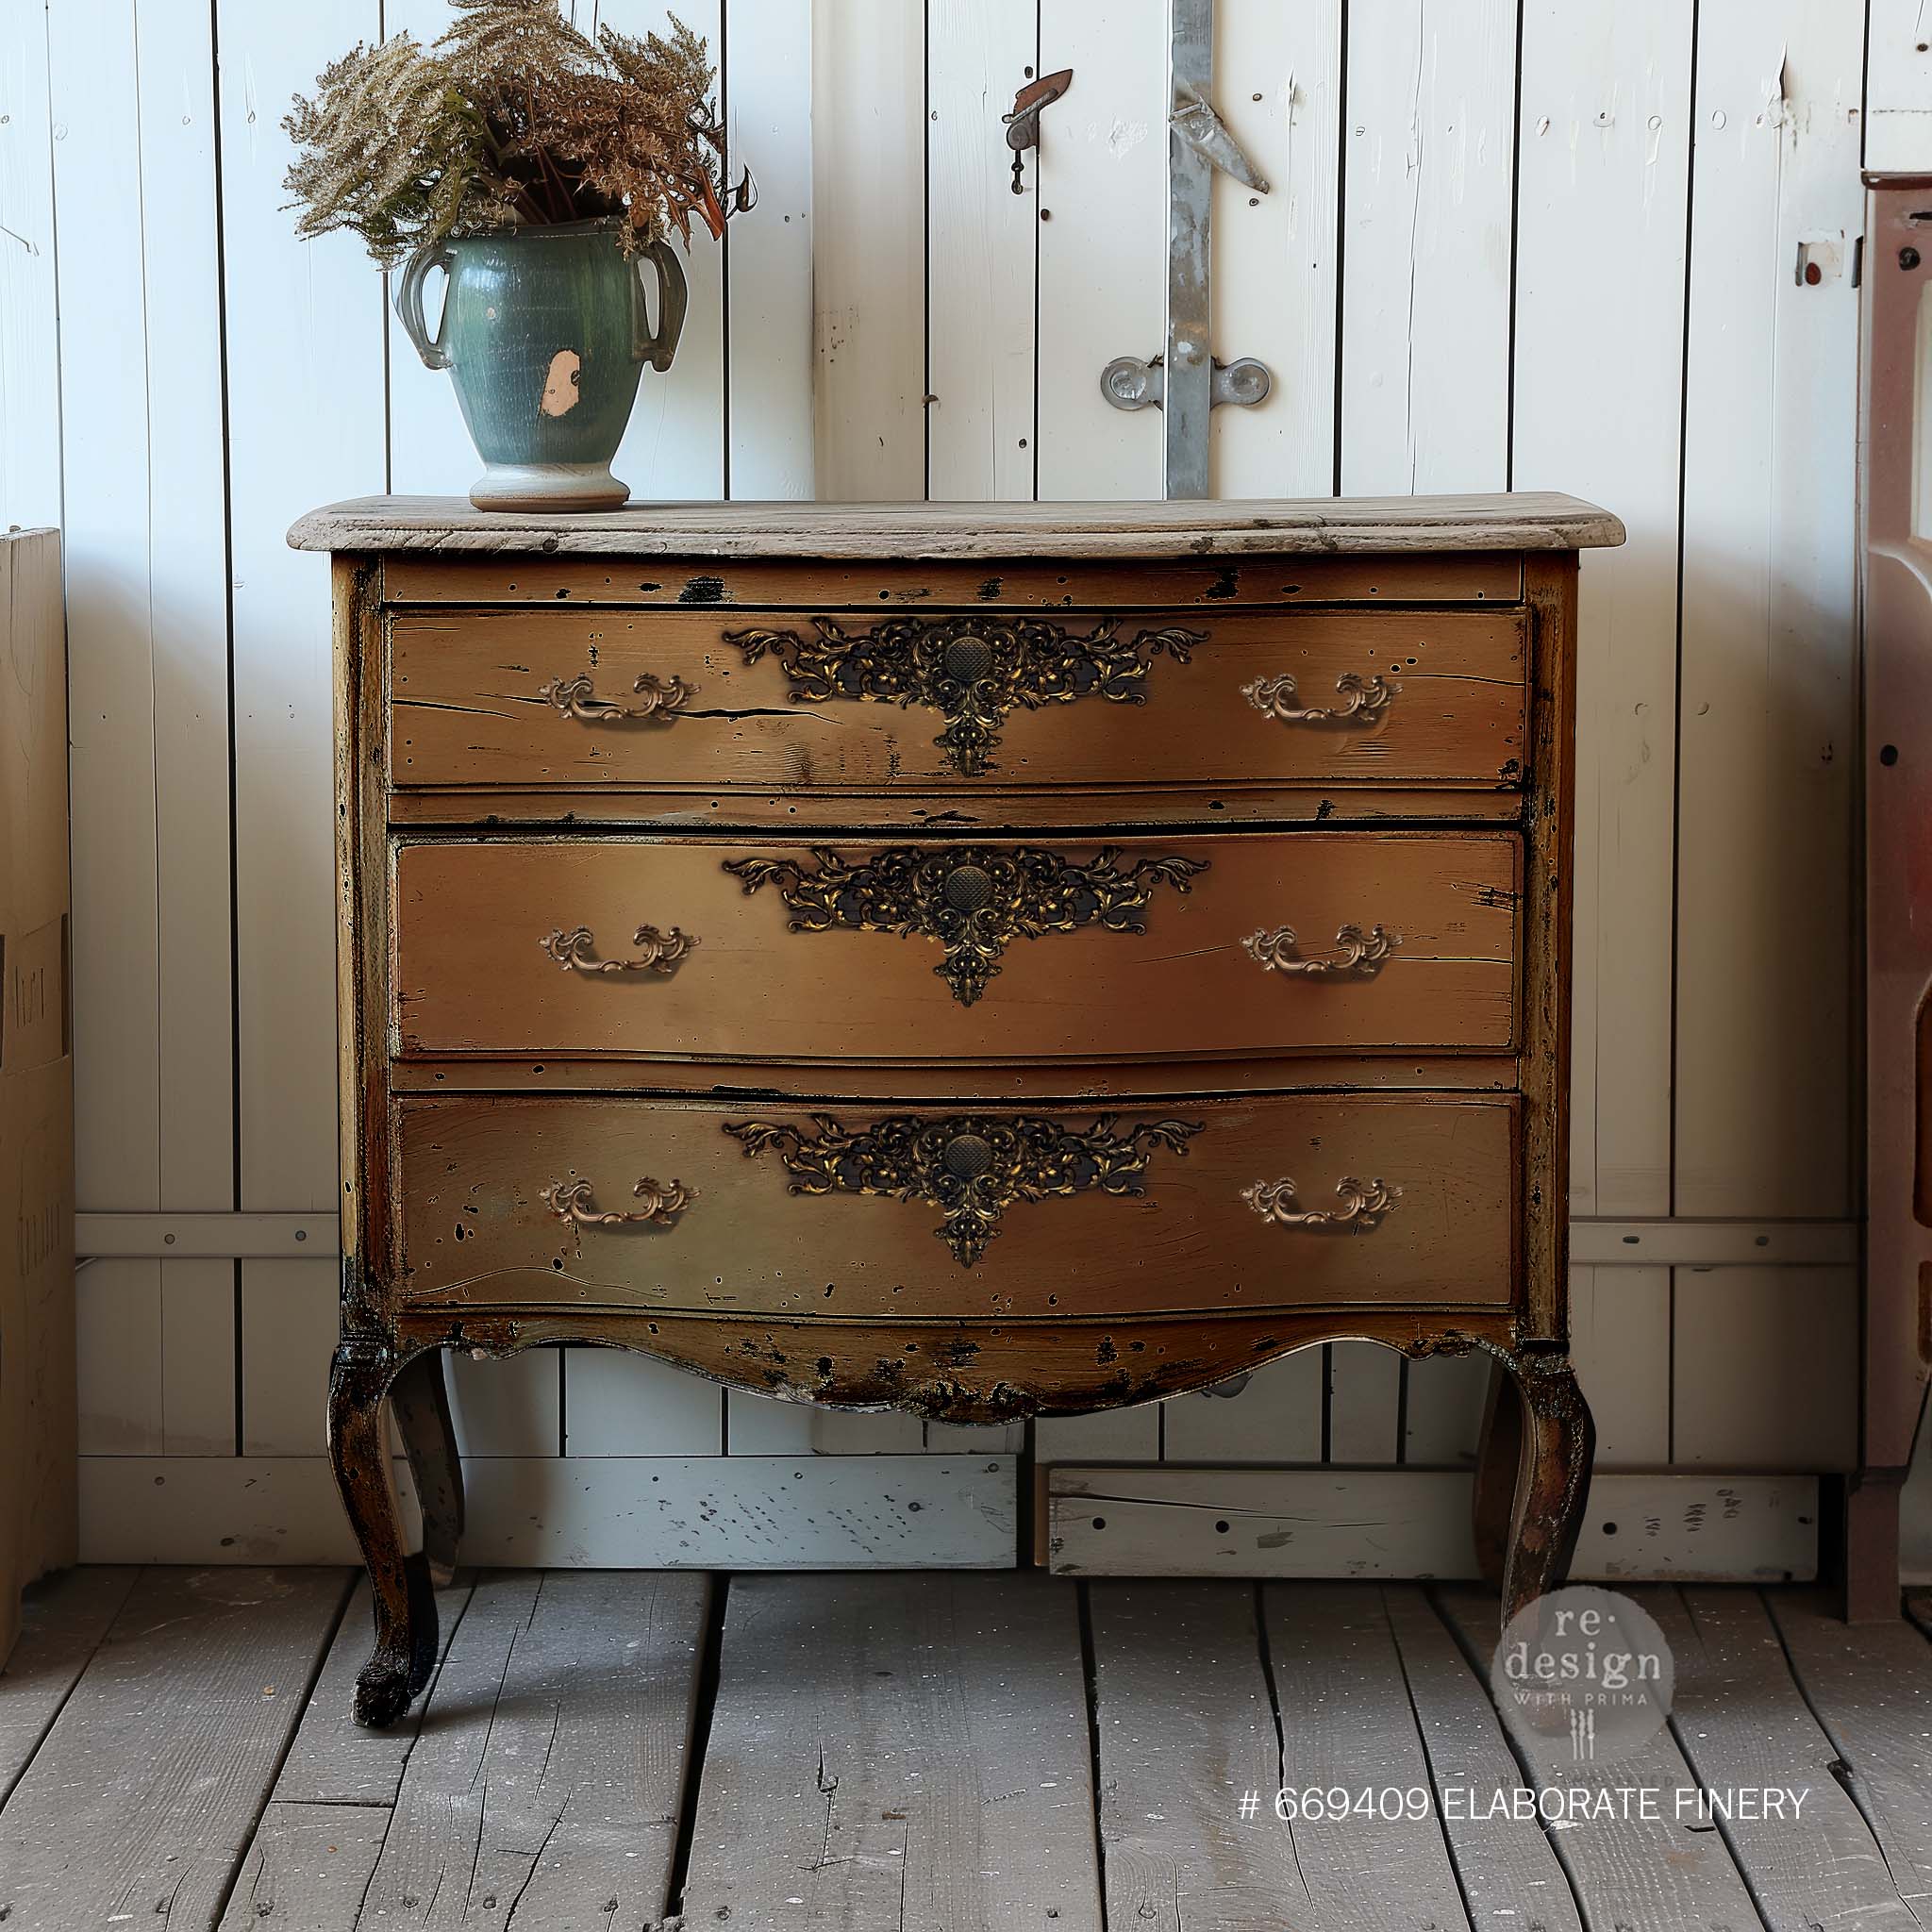 A vintage 3-drawer dresser is painted brown and features ReDesign with Prima's Elaborate Finery Decor Poly Casting at the top center of each drawer.